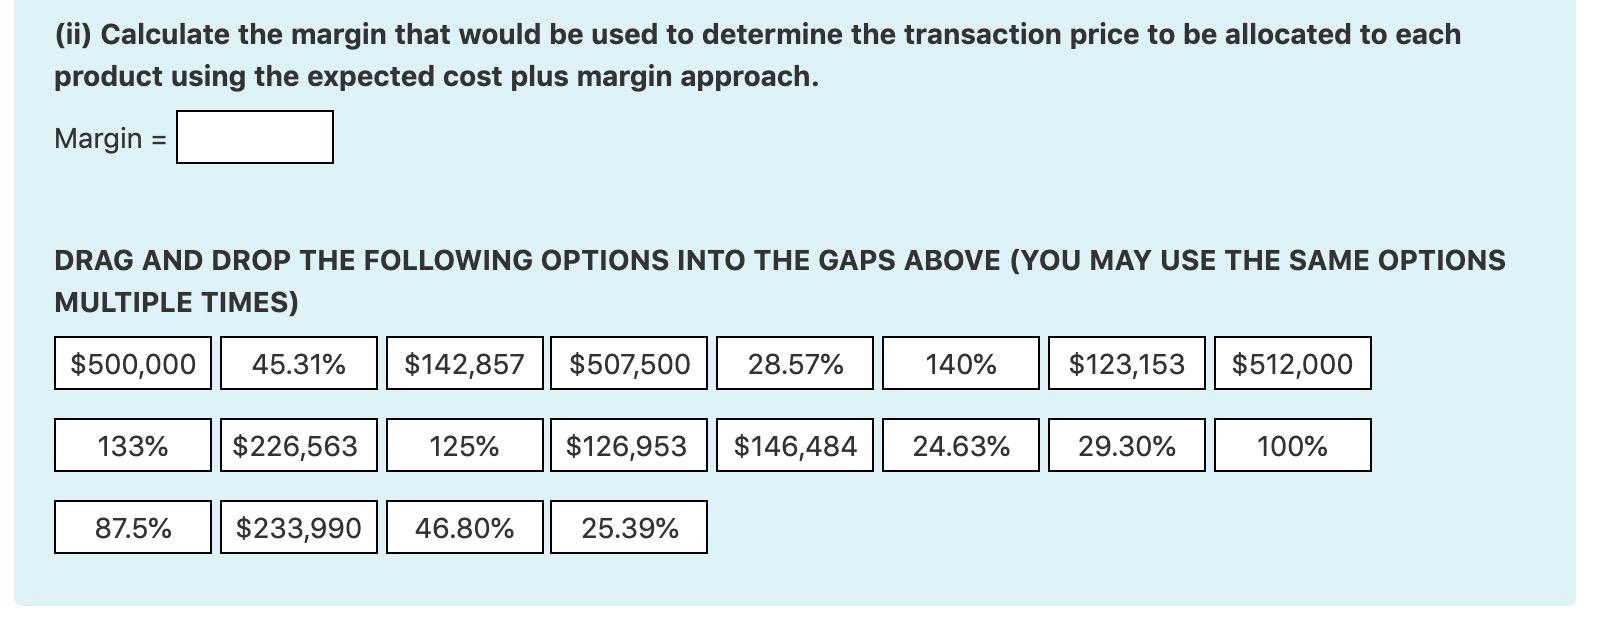 (ii) Calculate the margin that would be used to determine the transaction price to be allocated to each product using the exp